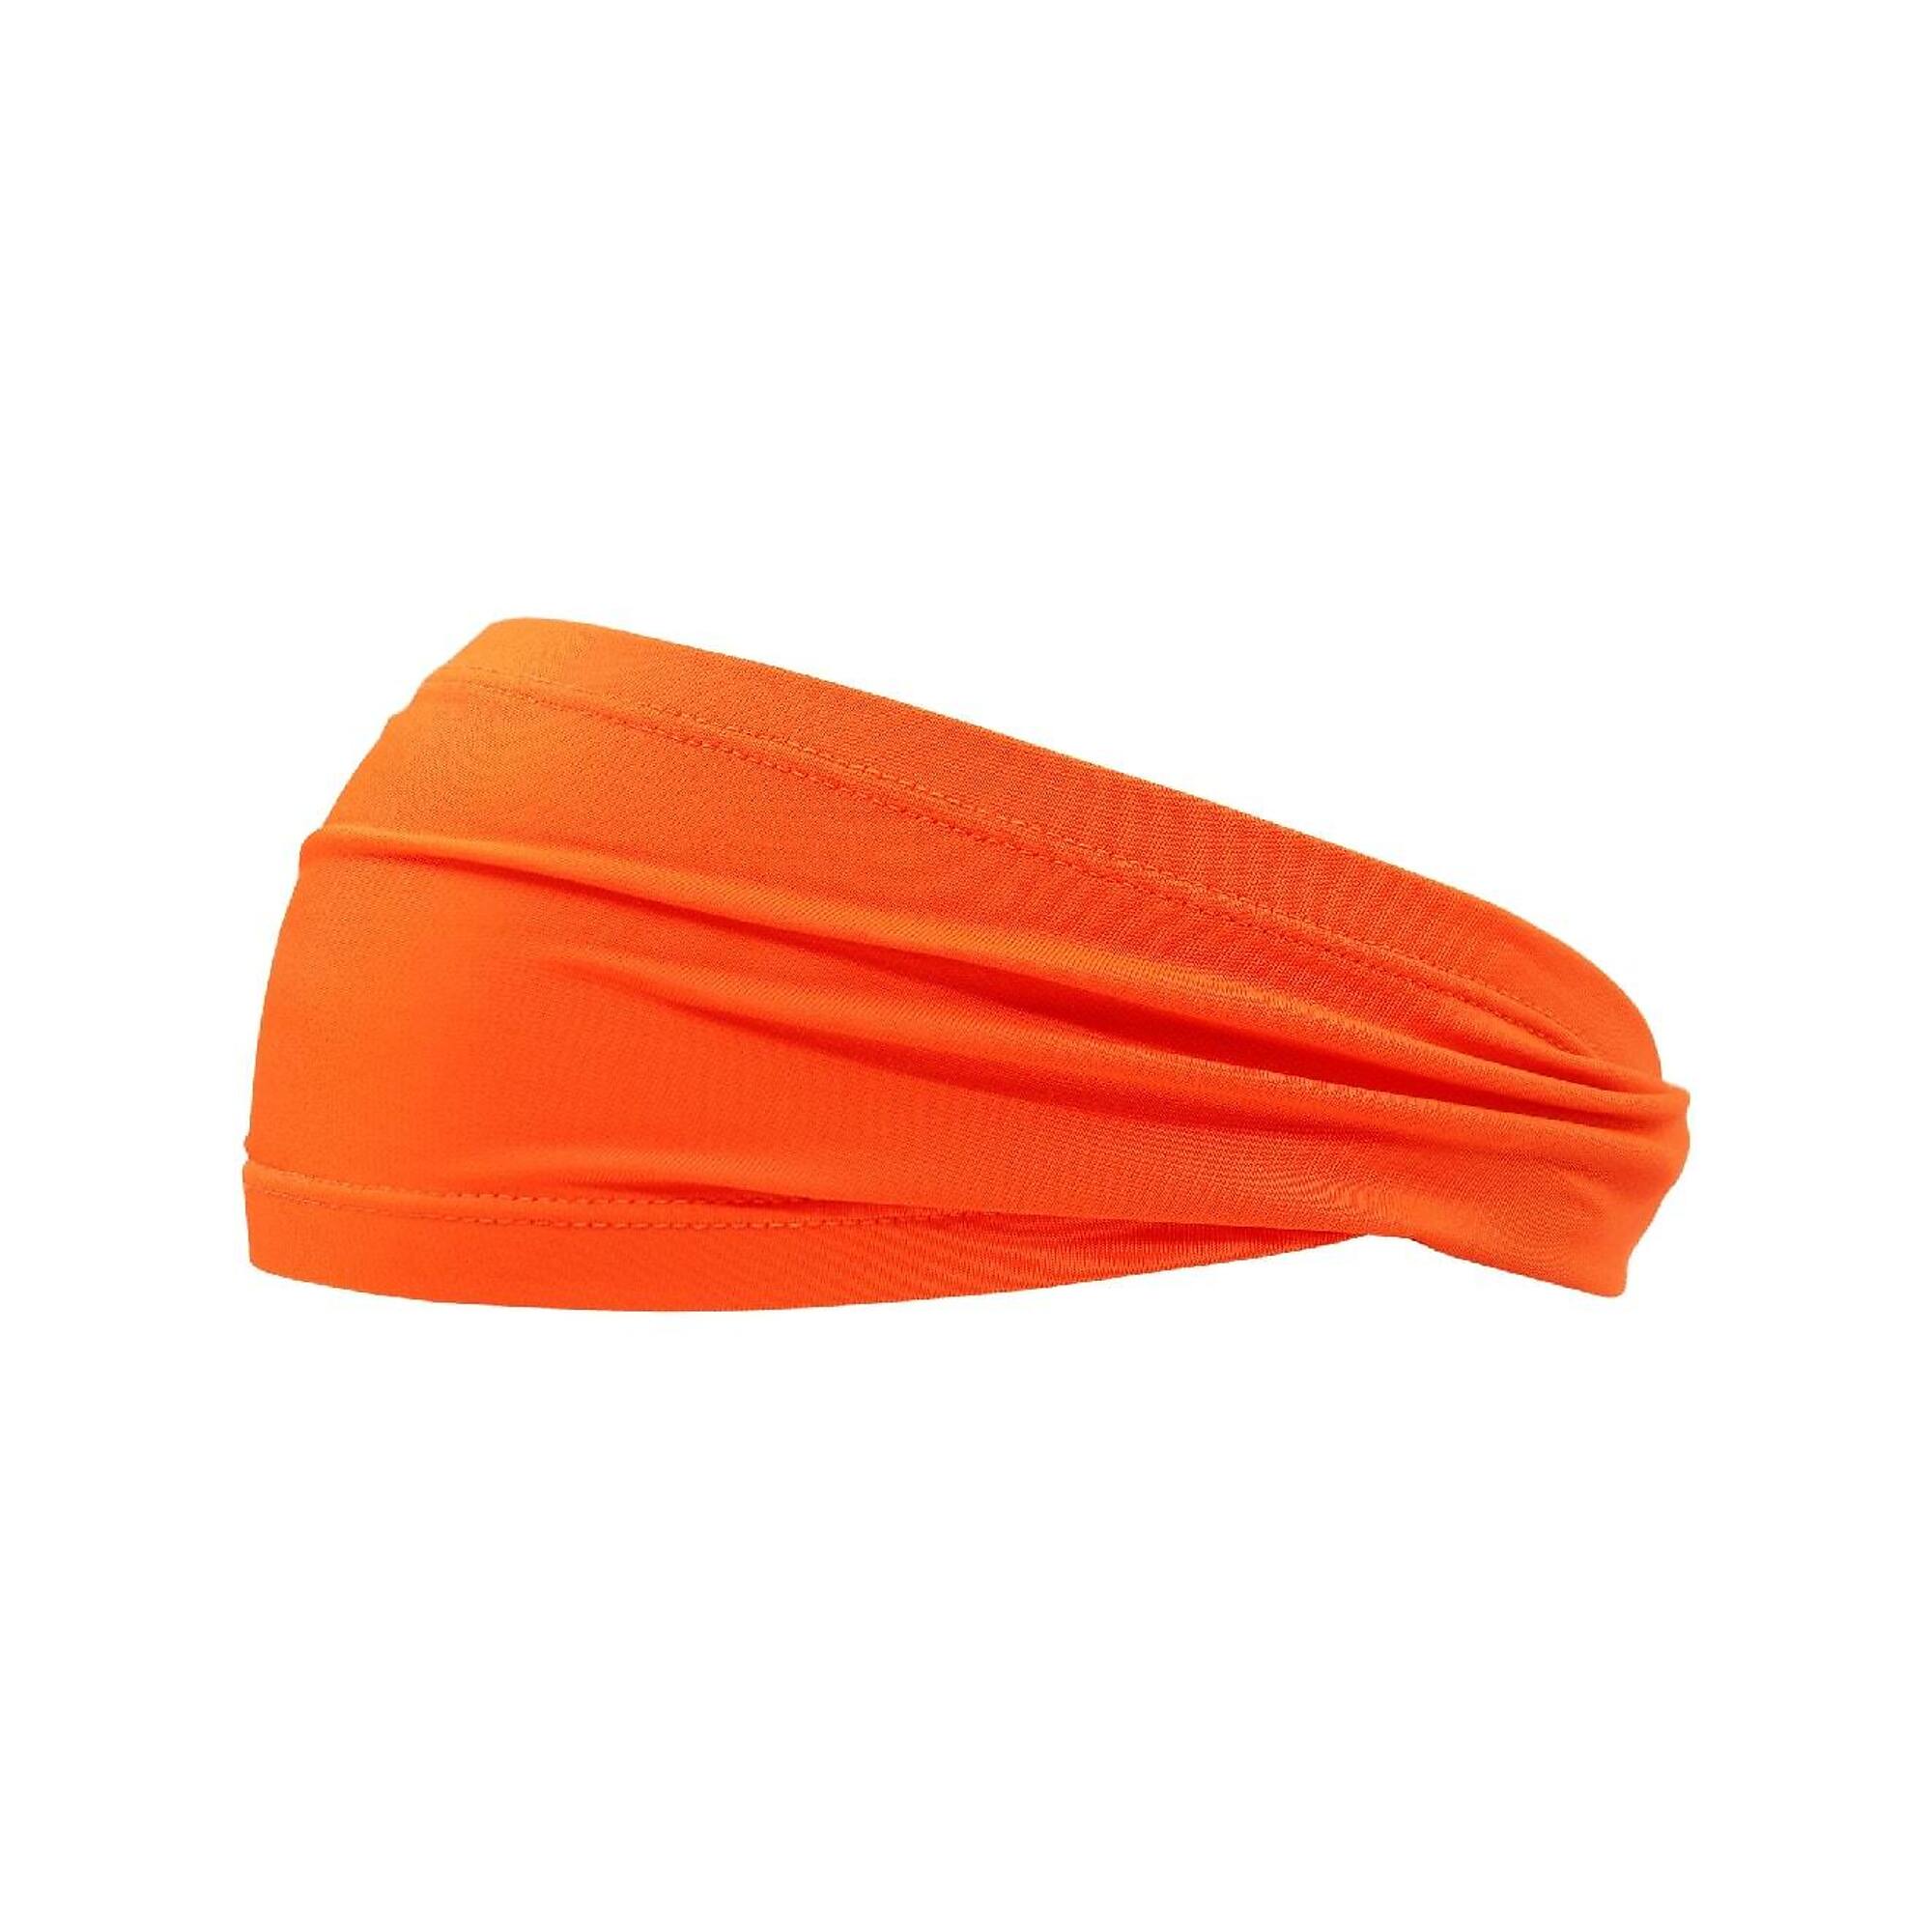 FrogWear, Orange Tapered Cooling Headband with 4-Stretch - 6 Pack, Size One Size, Material Polyester, Model HB-400